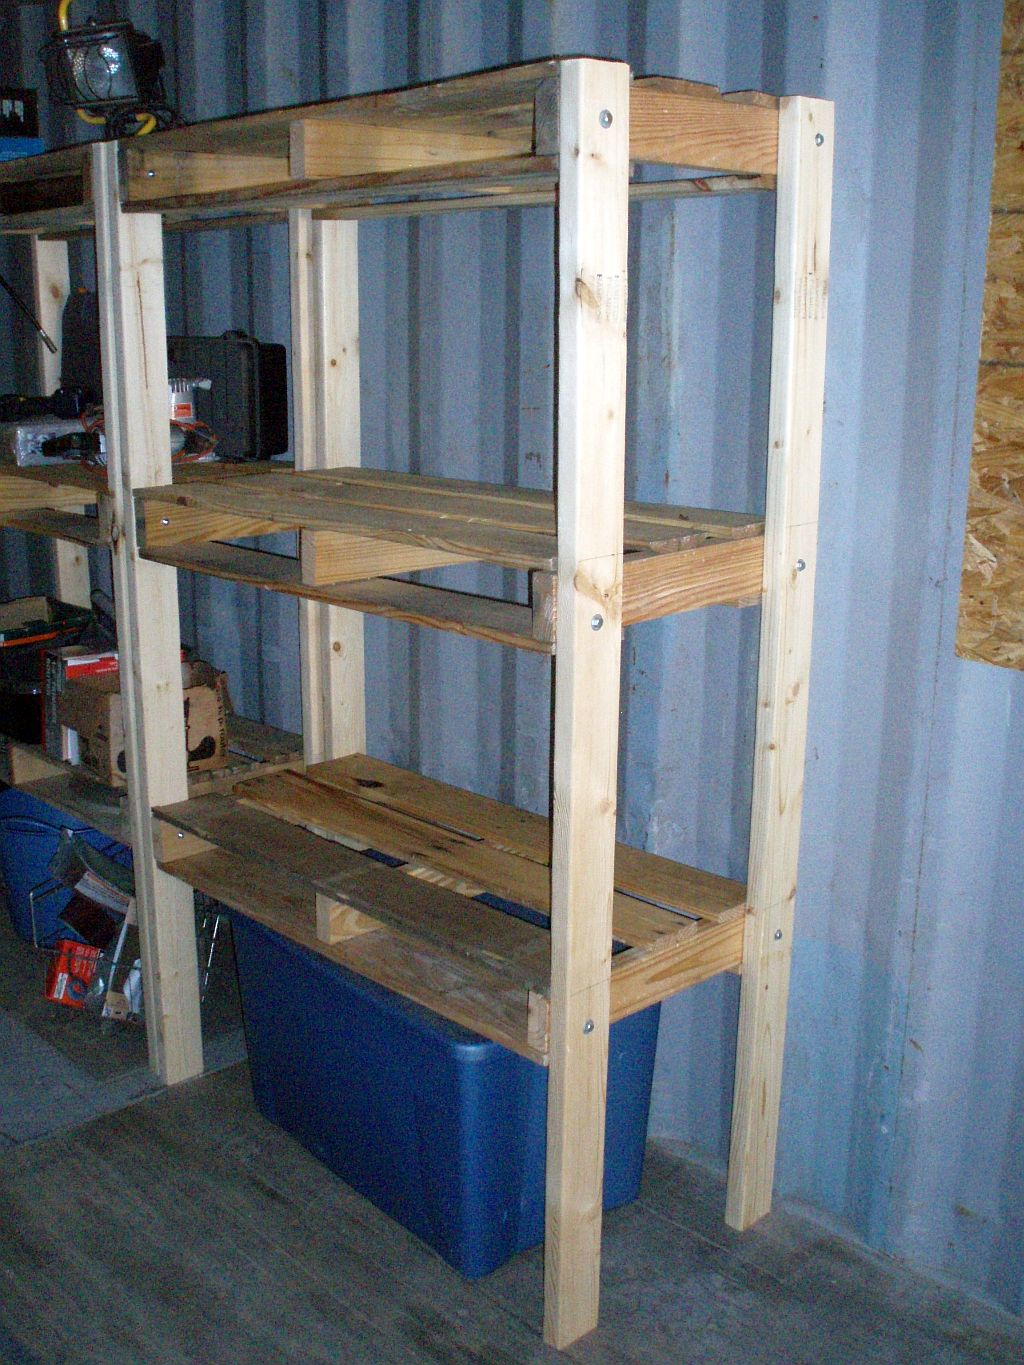 06/26/15 Current photo of my pallet shed. It's just as strong as the 